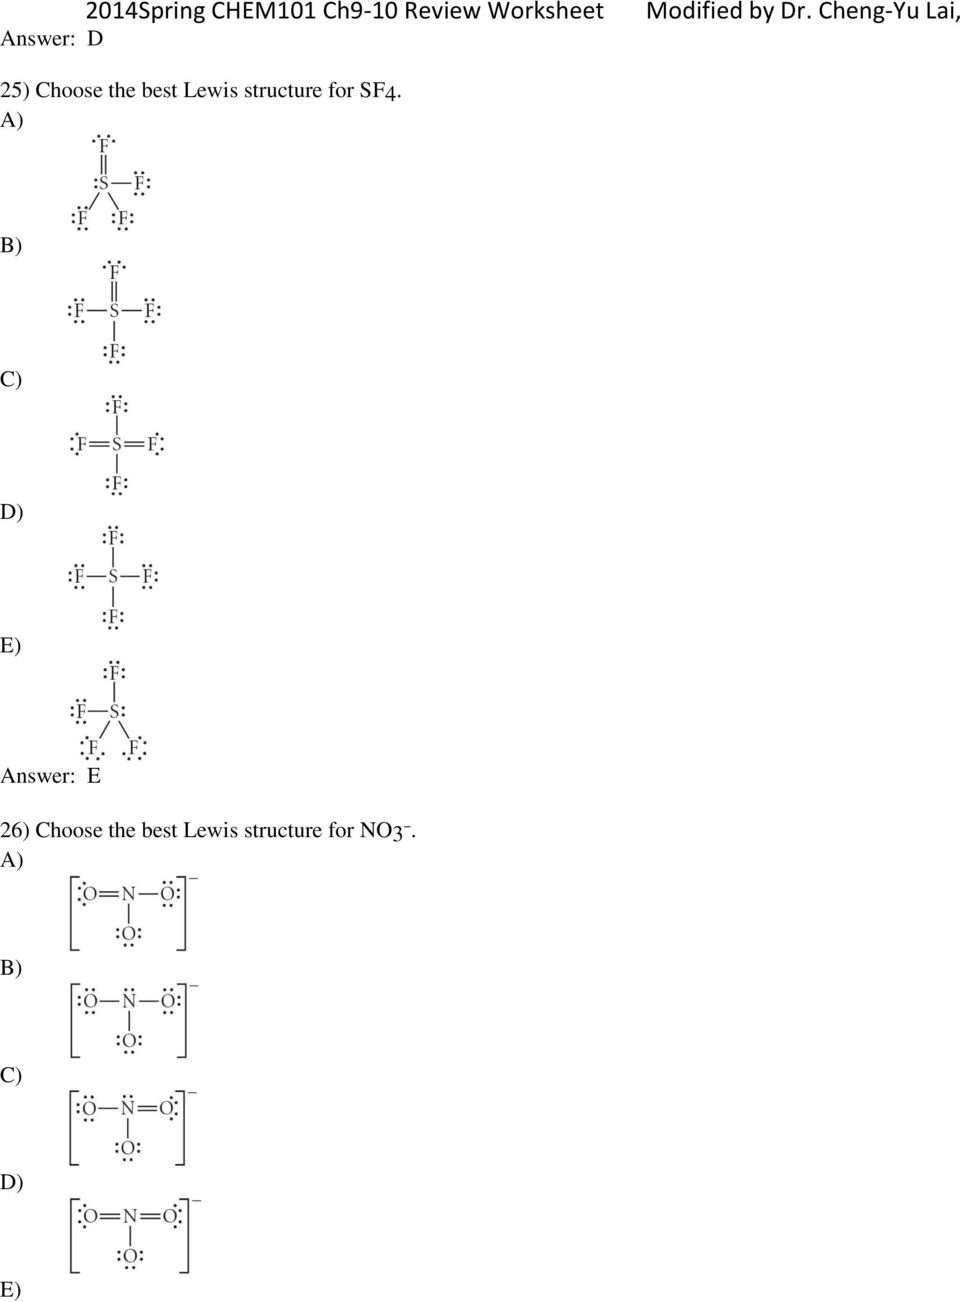 Lewis structure for SF4.